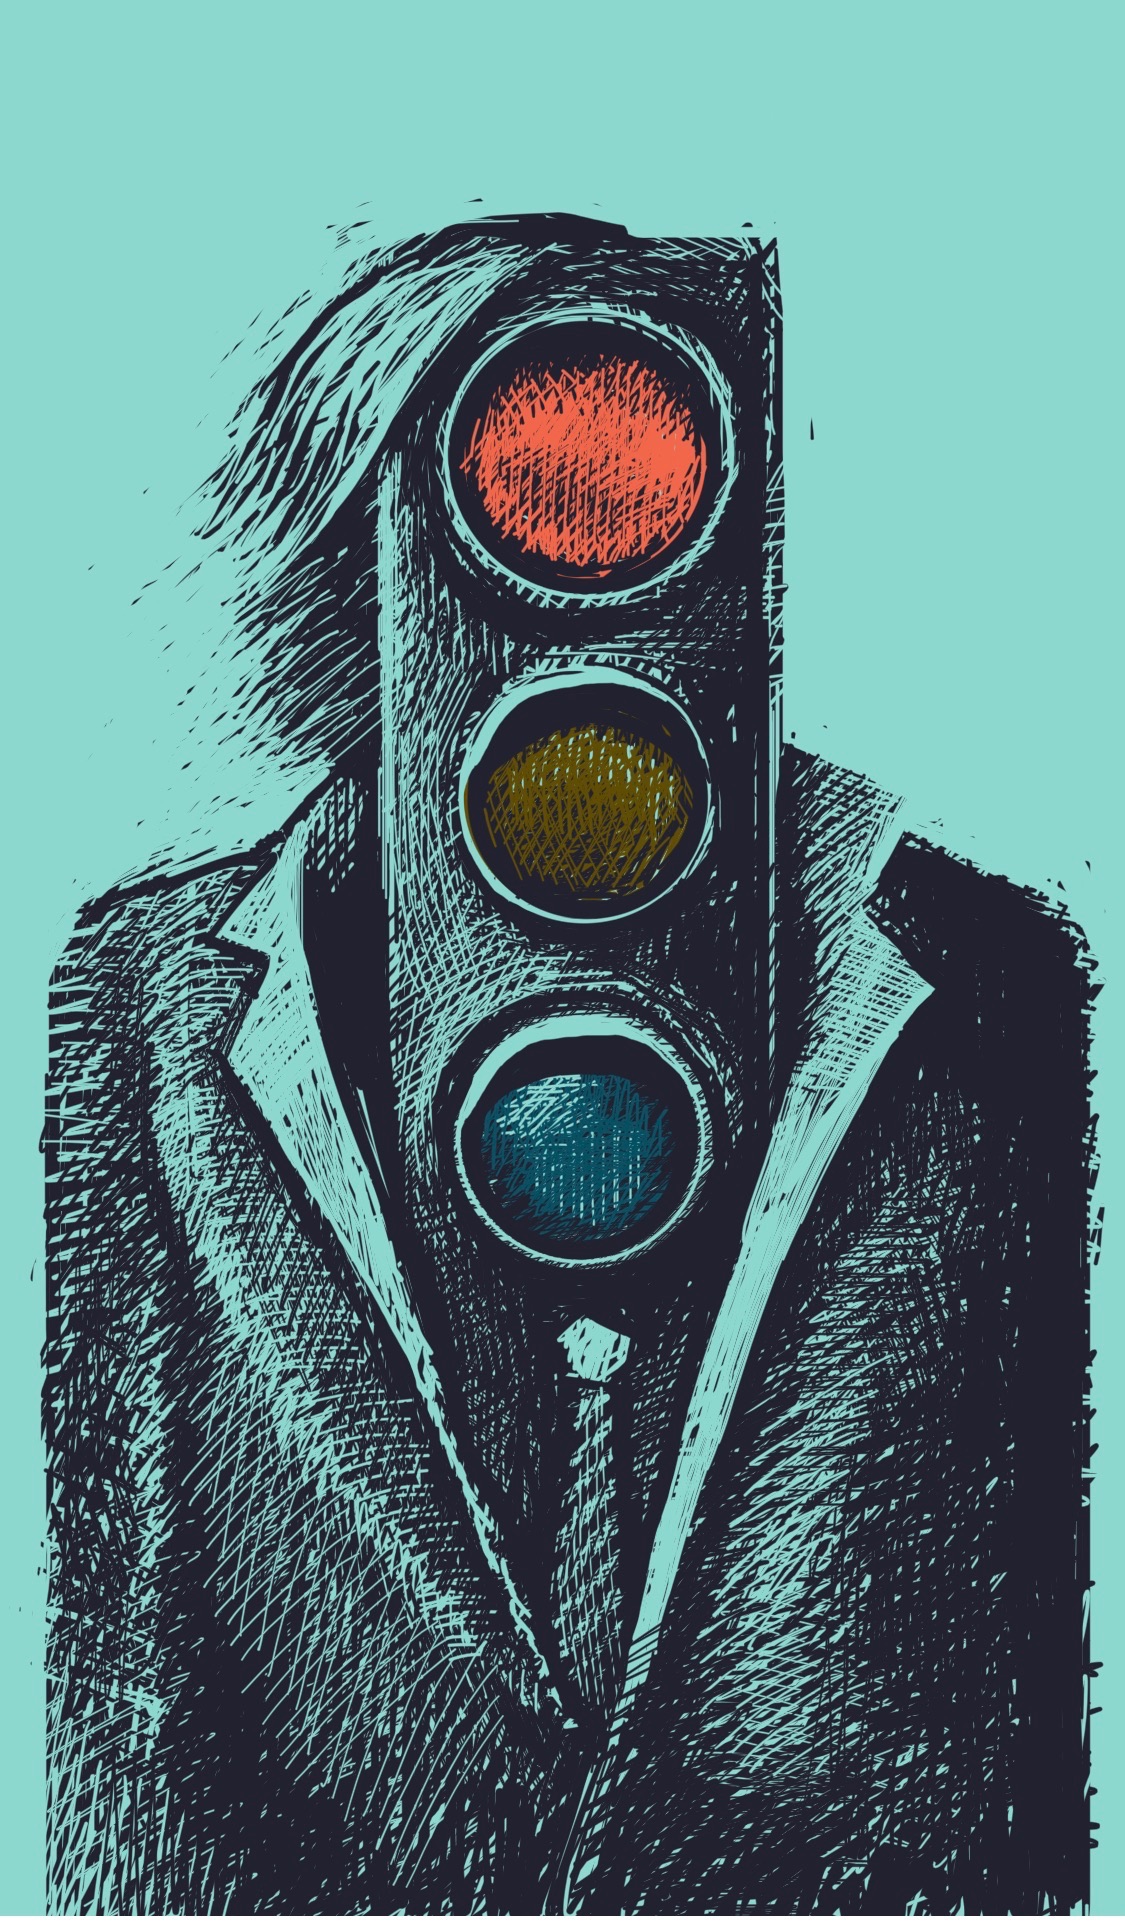 A long-haired person wearing a suit. The person's head is a traffic light set to red.